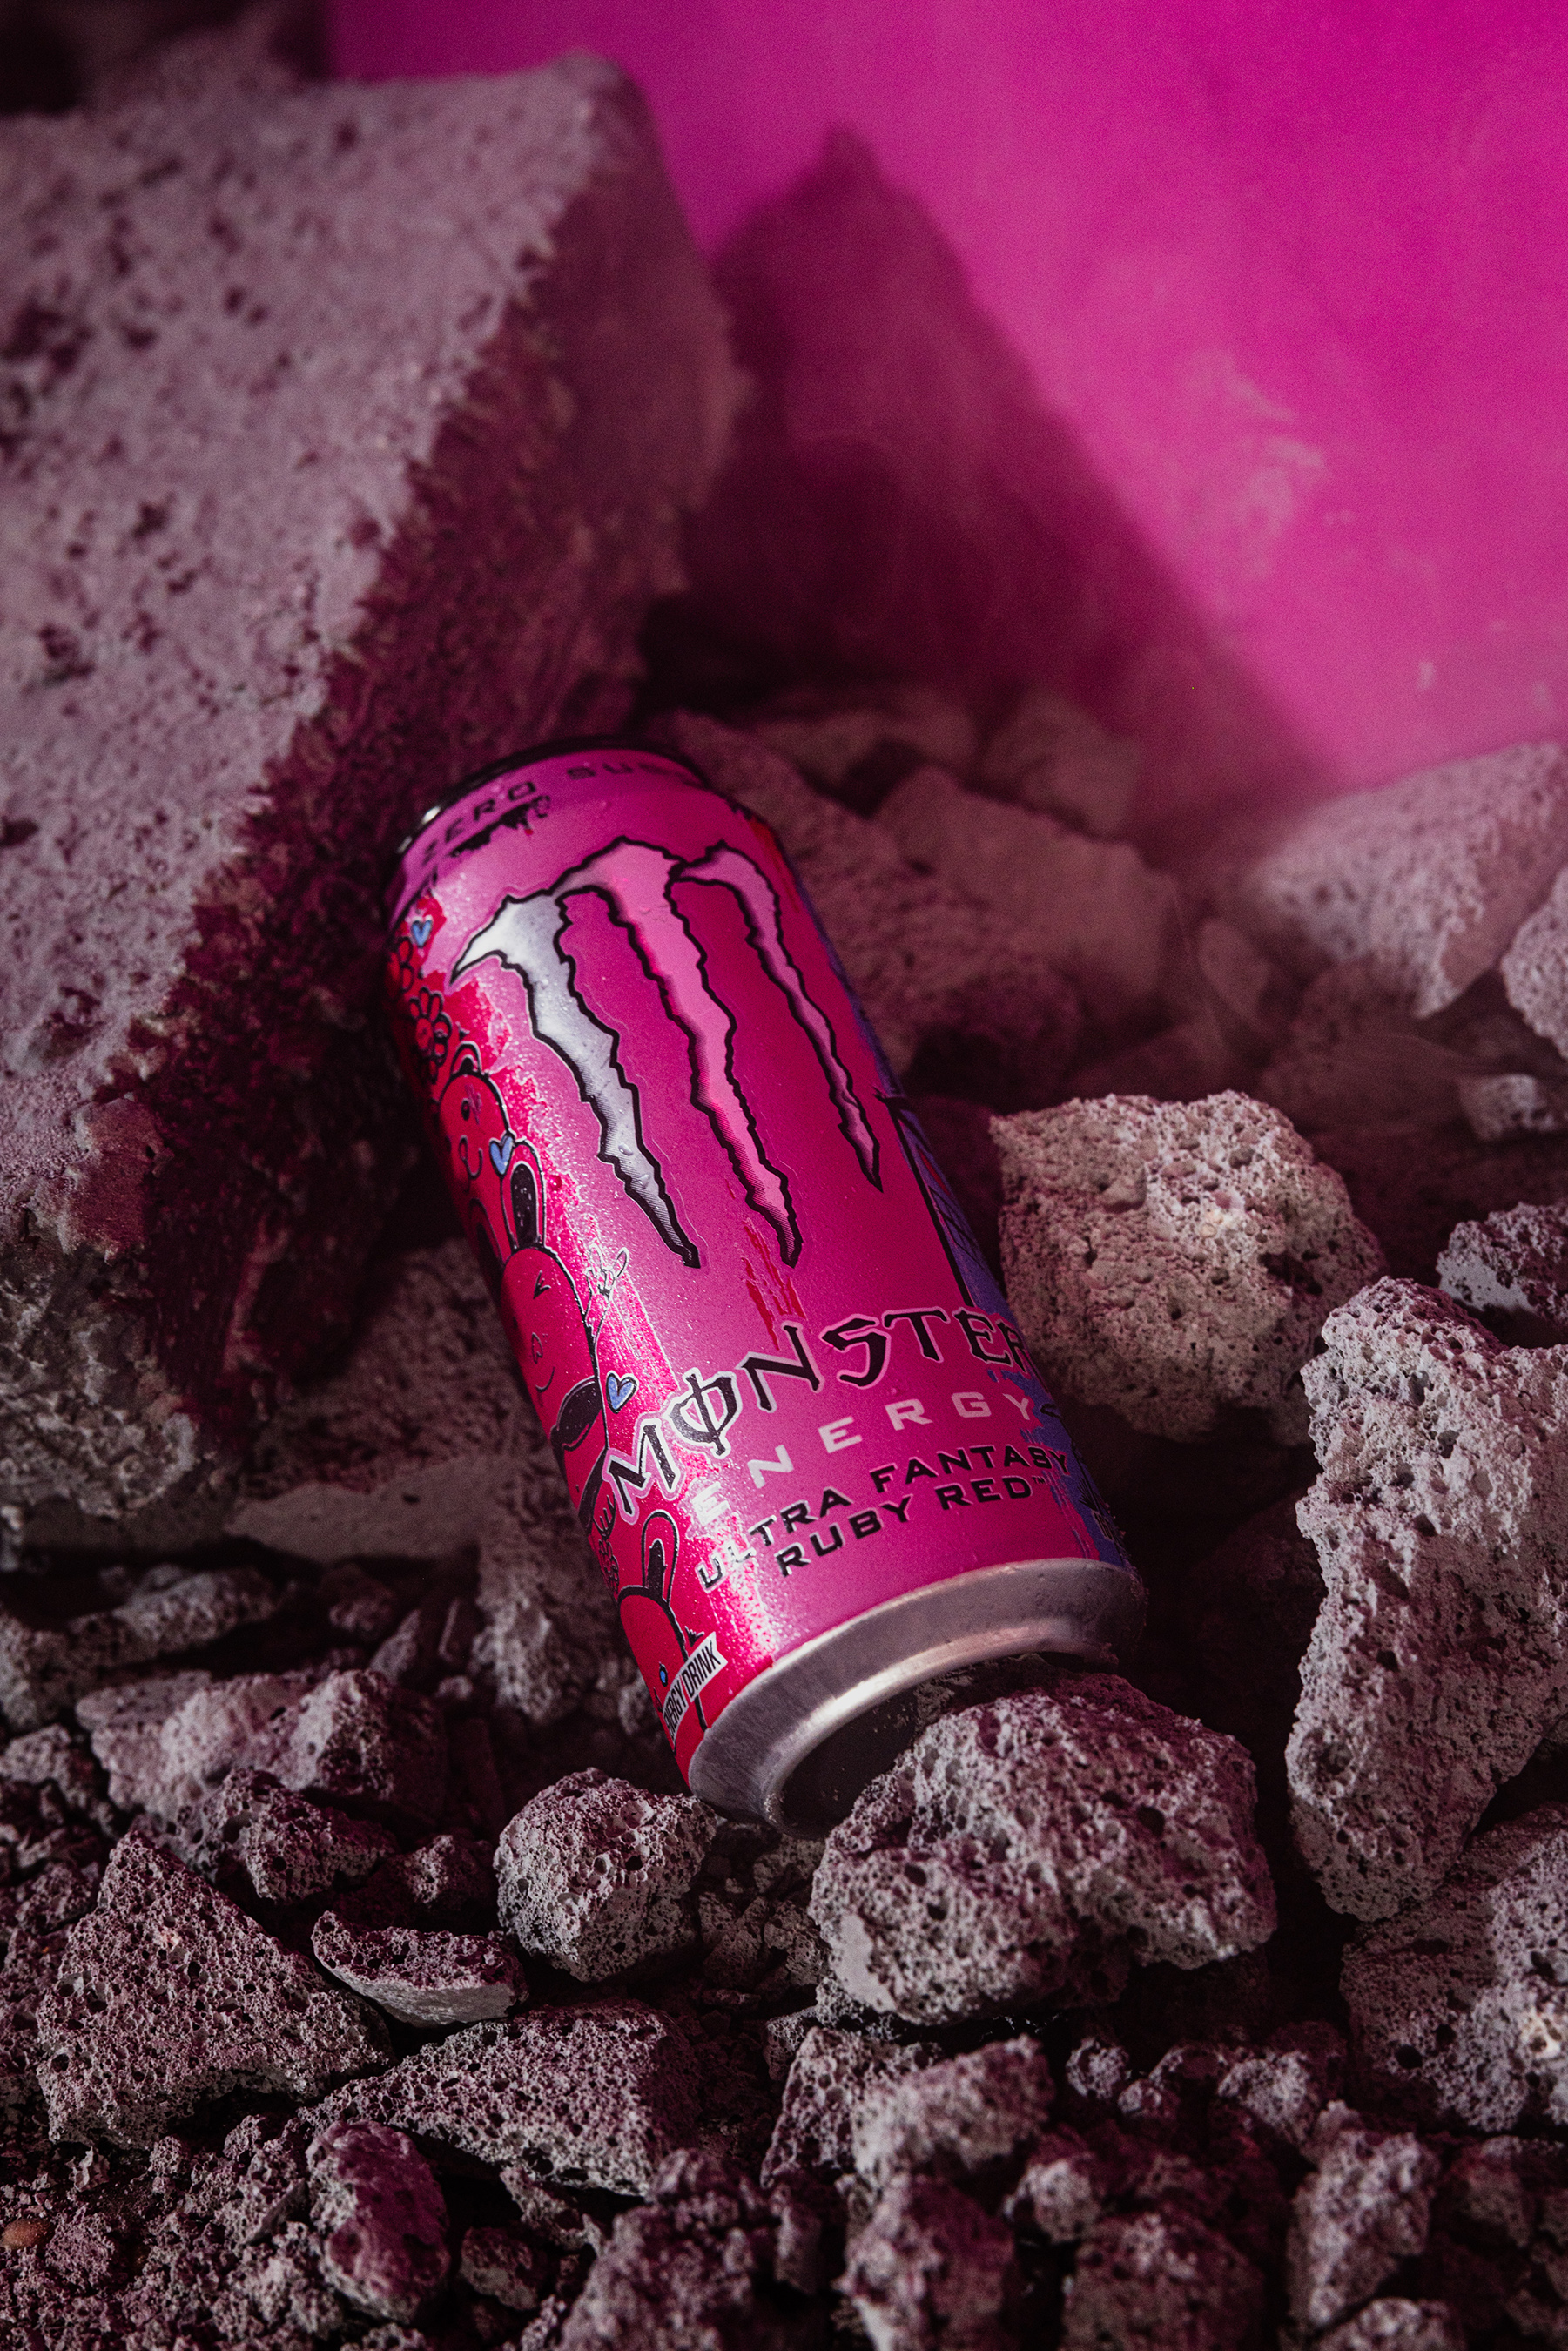 Monster Energy Ultra Launches New Fantasy Ruby Red in First-Ever Augmented Reality Reveal of a Beverage Can